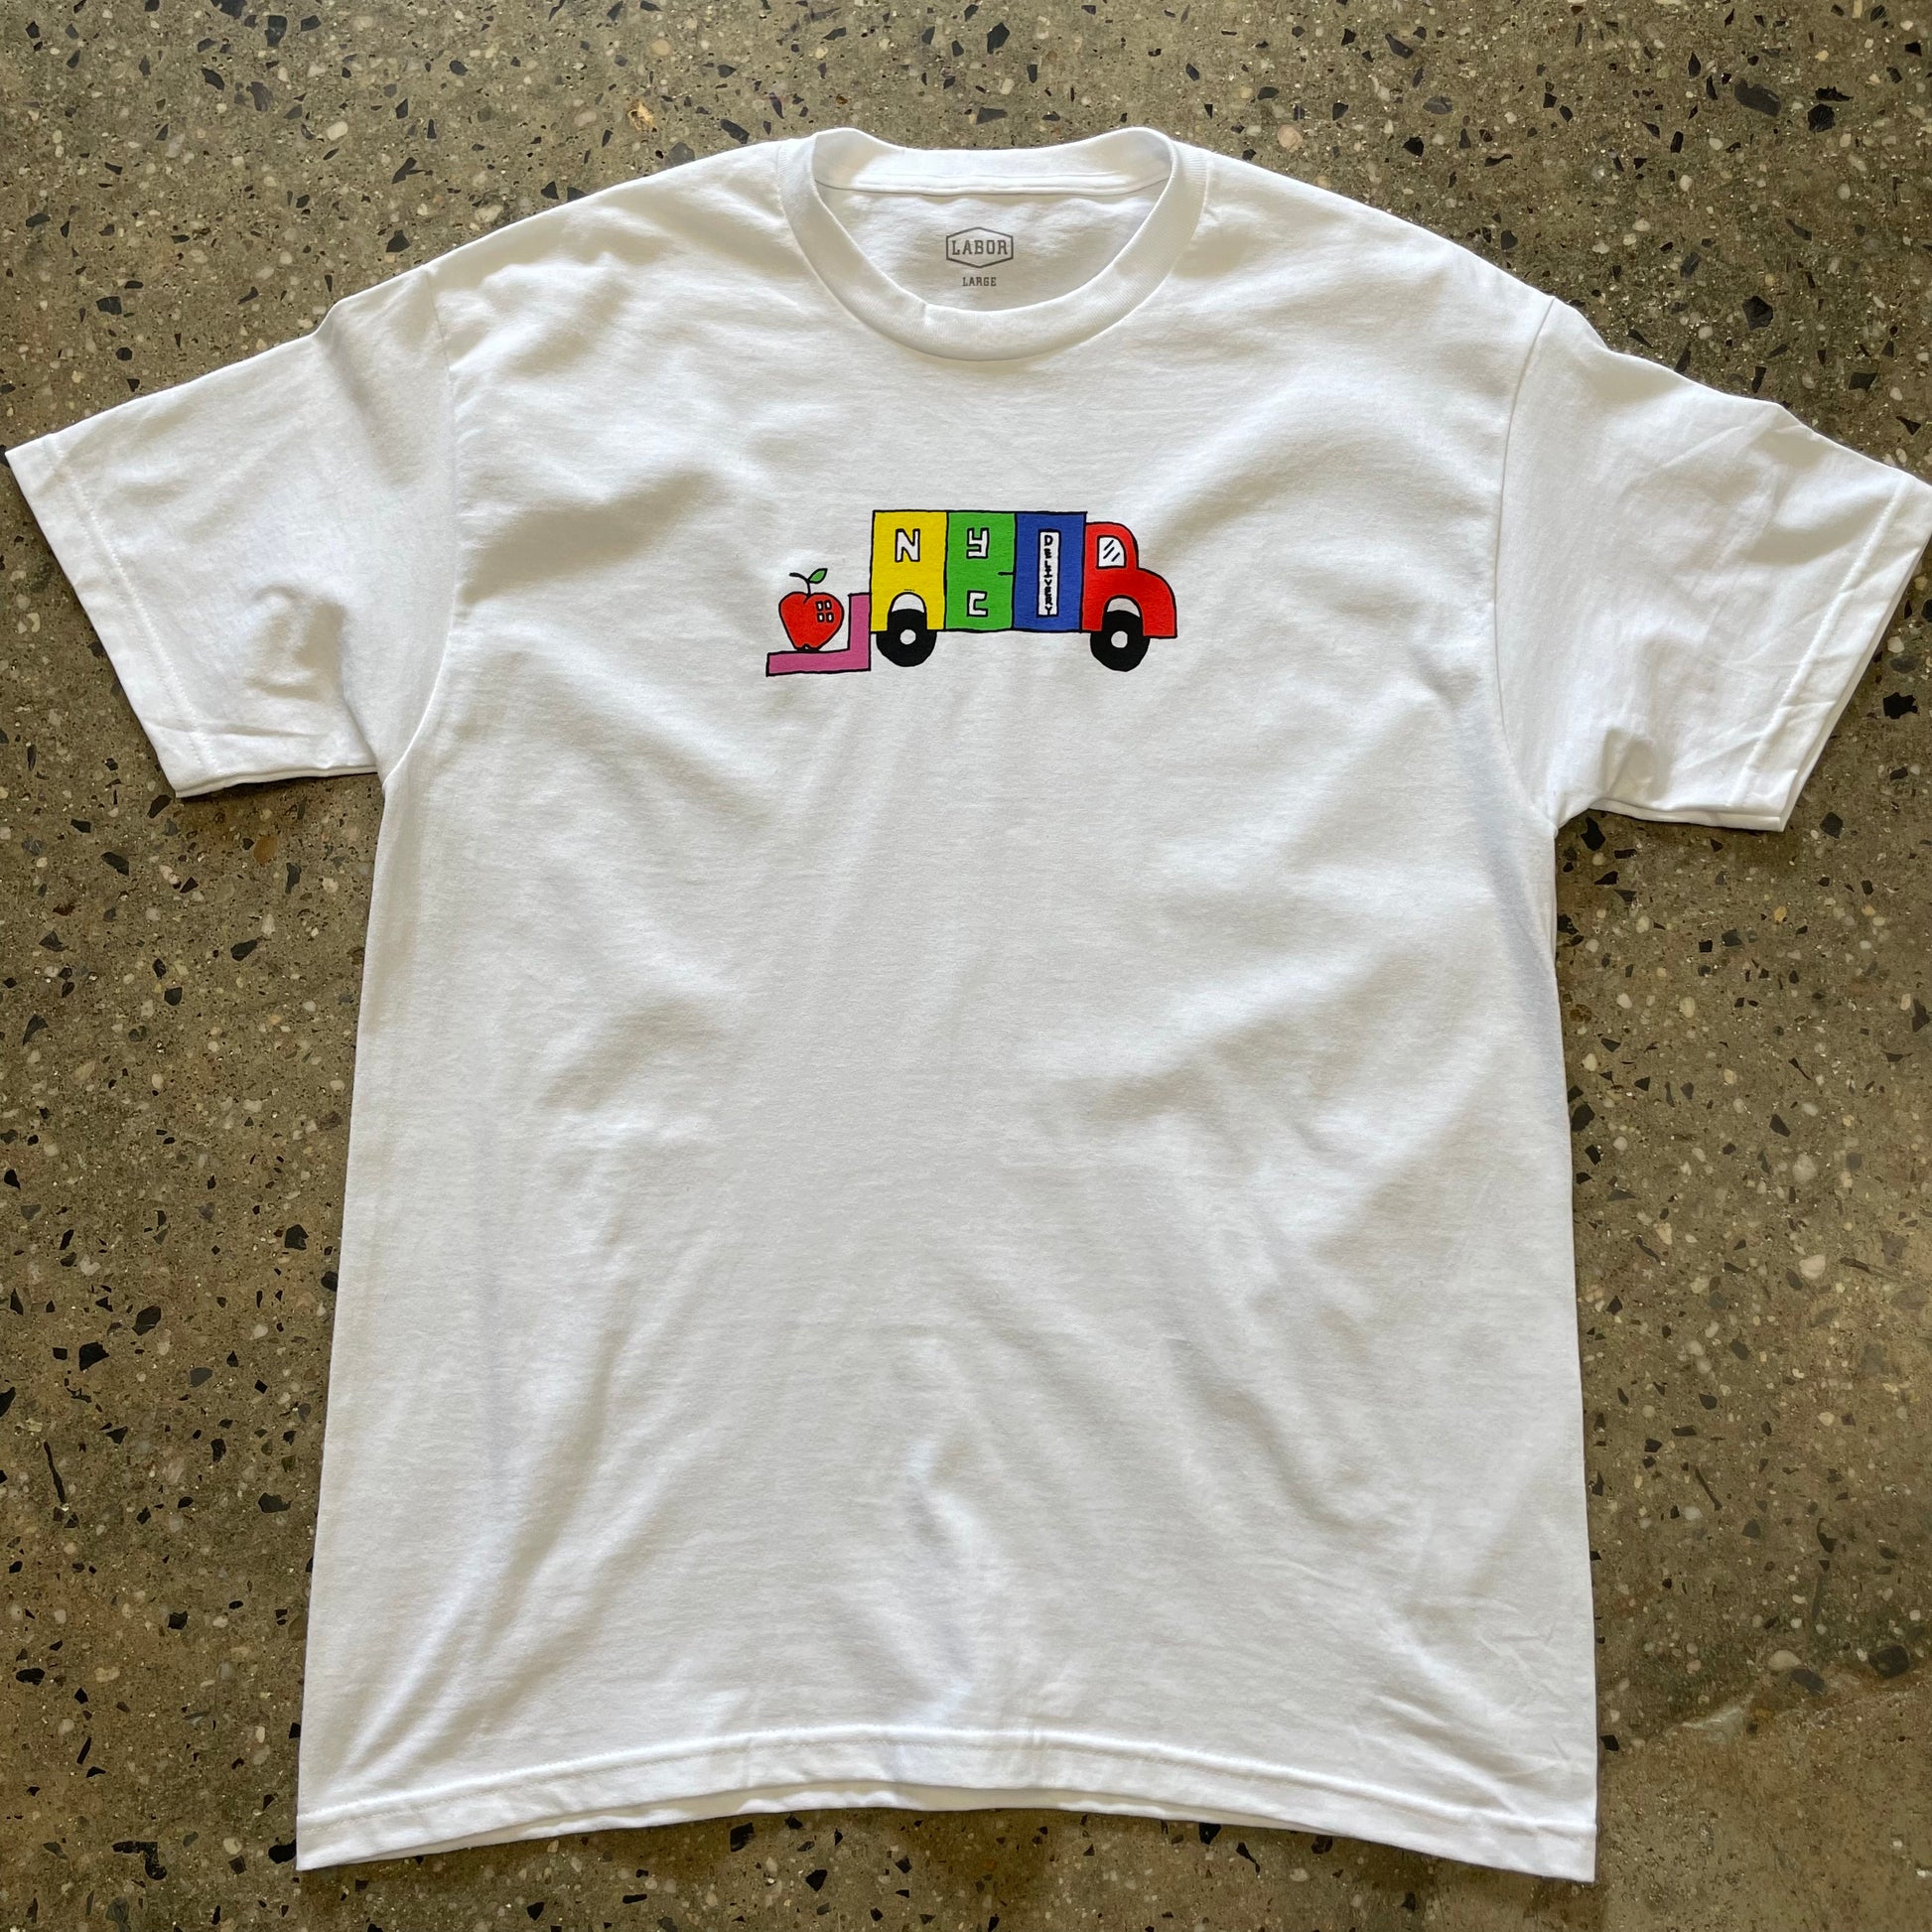 Labor Multi color box truck logo printed in center chest of white t-shirt